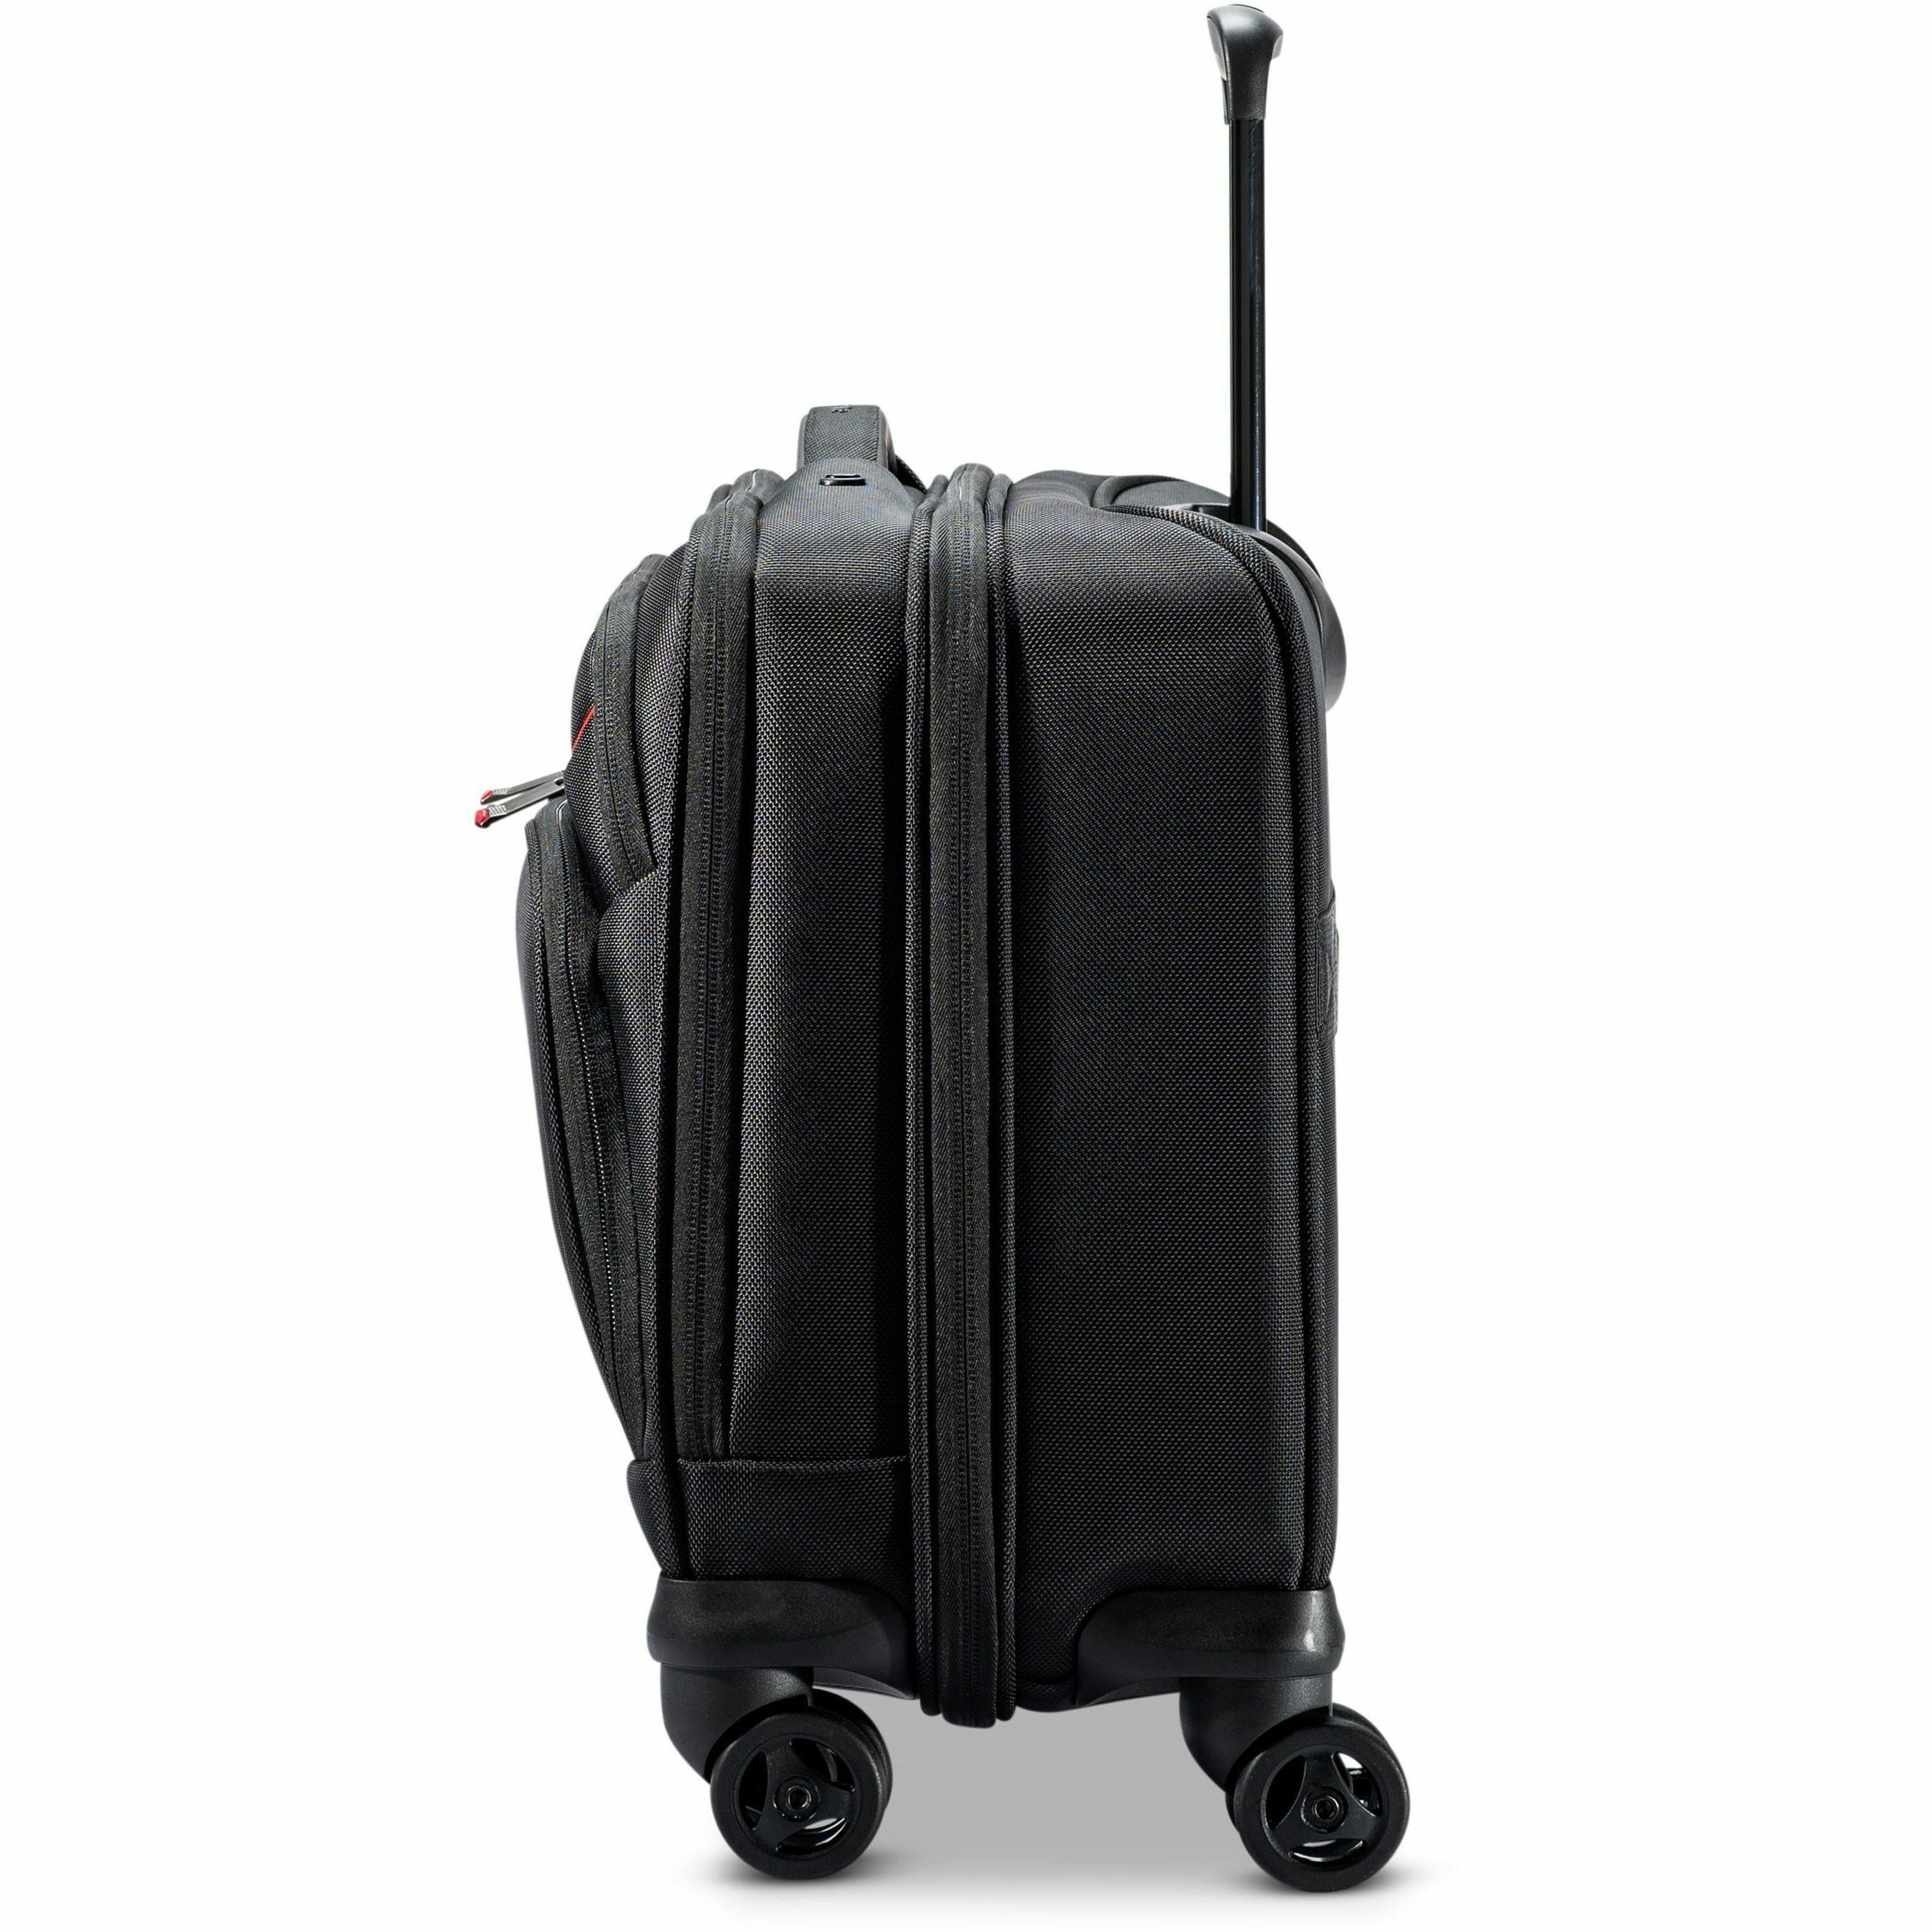 samsonite-xenon-30-travel-luggage-case-for-129-to-156-notebook-tablet-accessories-black-1680d-ballistic-polyester-body-tricot-interior-material-trolley-strap-handle-1-each_sml1473331041 - 5